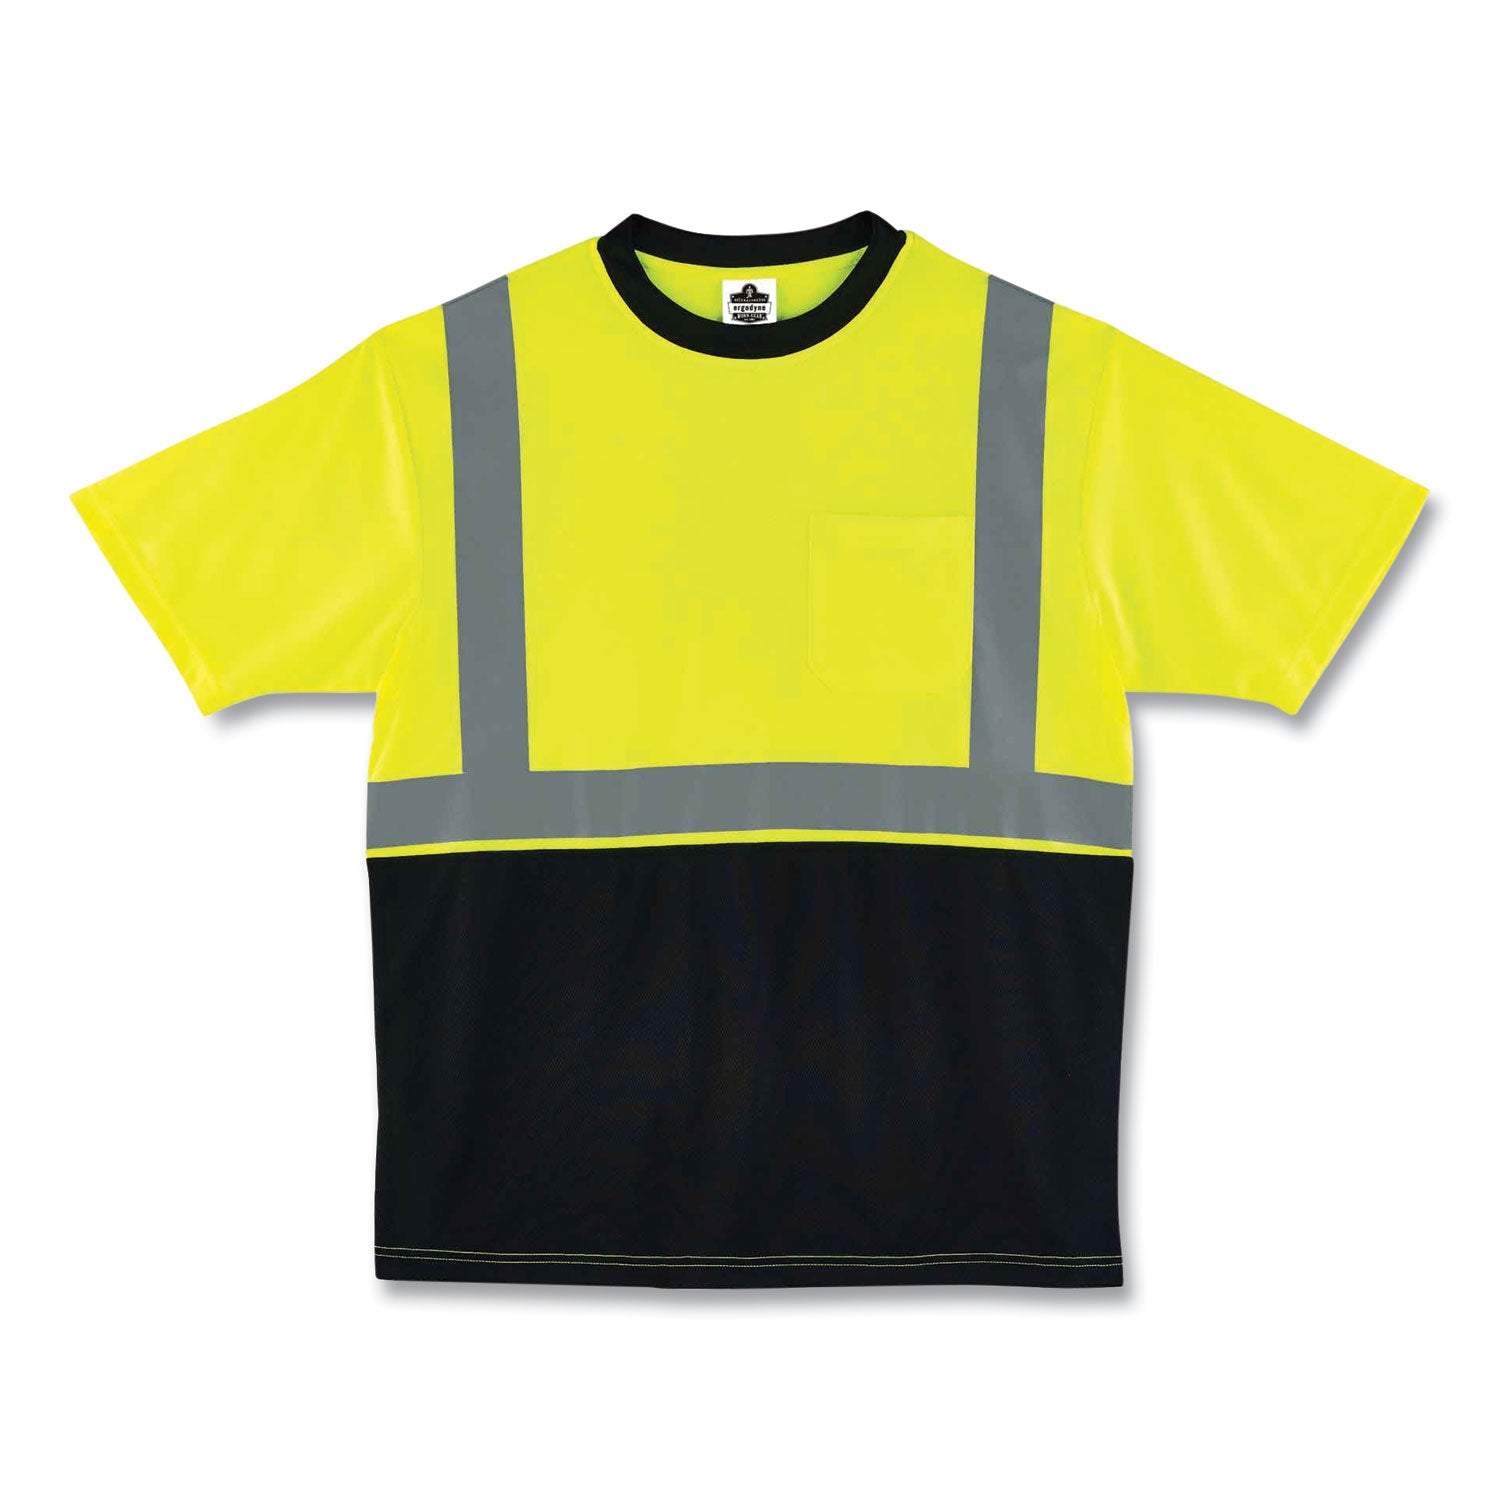 glowear-8289bk-class-2-hi-vis-t-shirt-with-black-bottom-3x-large-lime-ships-in-1-3-business-days_ego22507 - 1